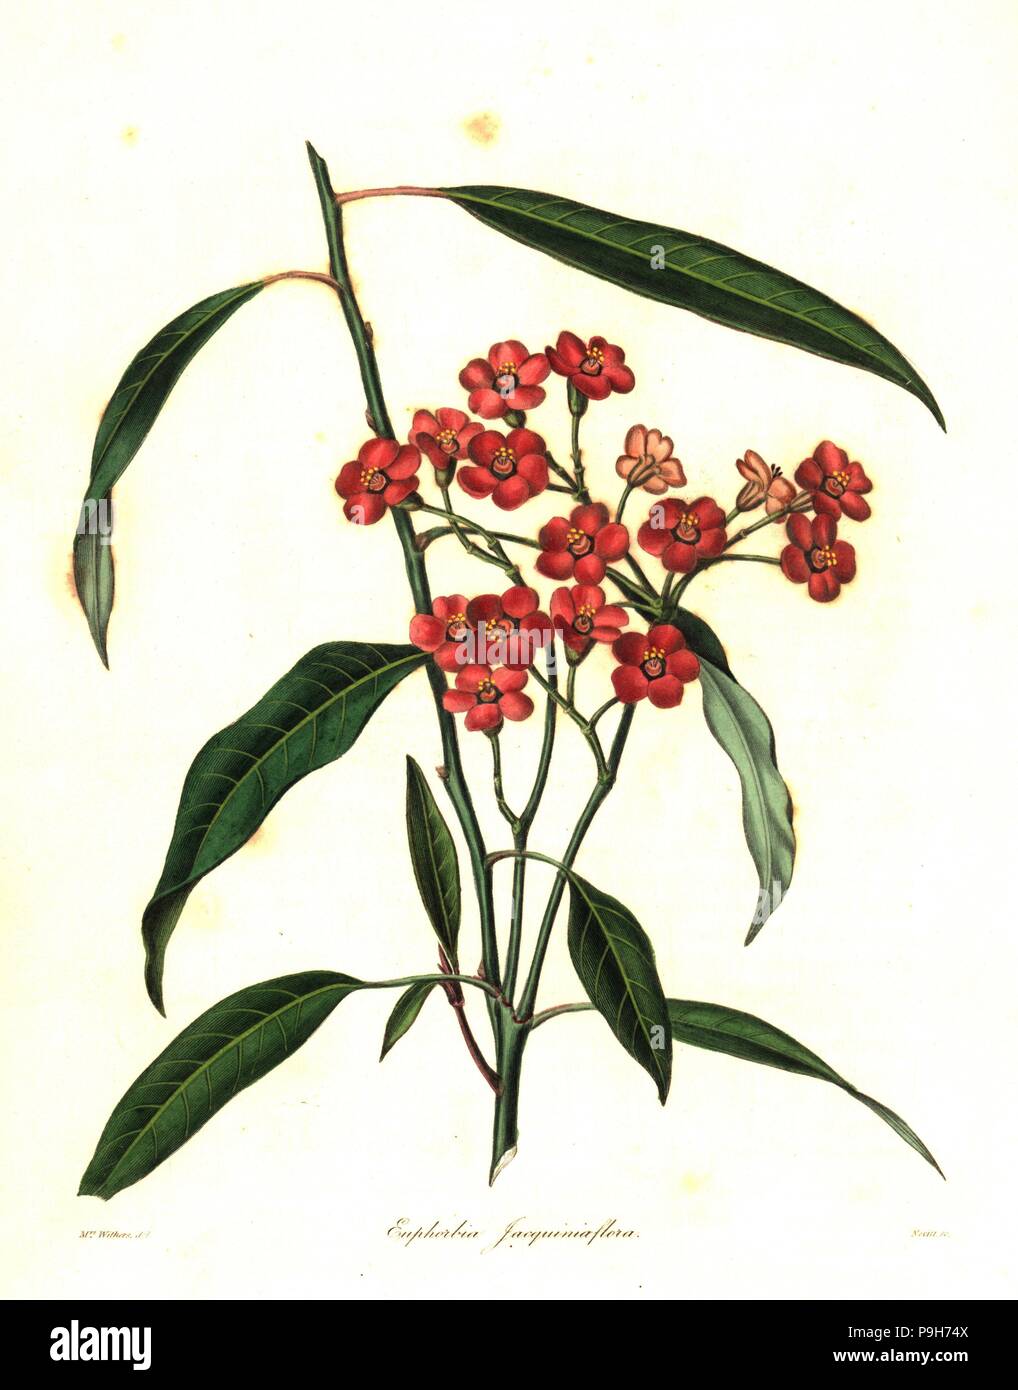 Scarlet plume, Euphorbia fulgens (Jacquinia-flowered euphobia, Euphorbia jacquiniiflora Euphorbia jacquiniaeflora). Handcoloured copperplate engraving by S. Nevitt after a botanical illustration by Mrs Augusta Withers from Benjamin Maund and the Rev. John Stevens Henslow's The Botanist, London, 1836. Stock Photo